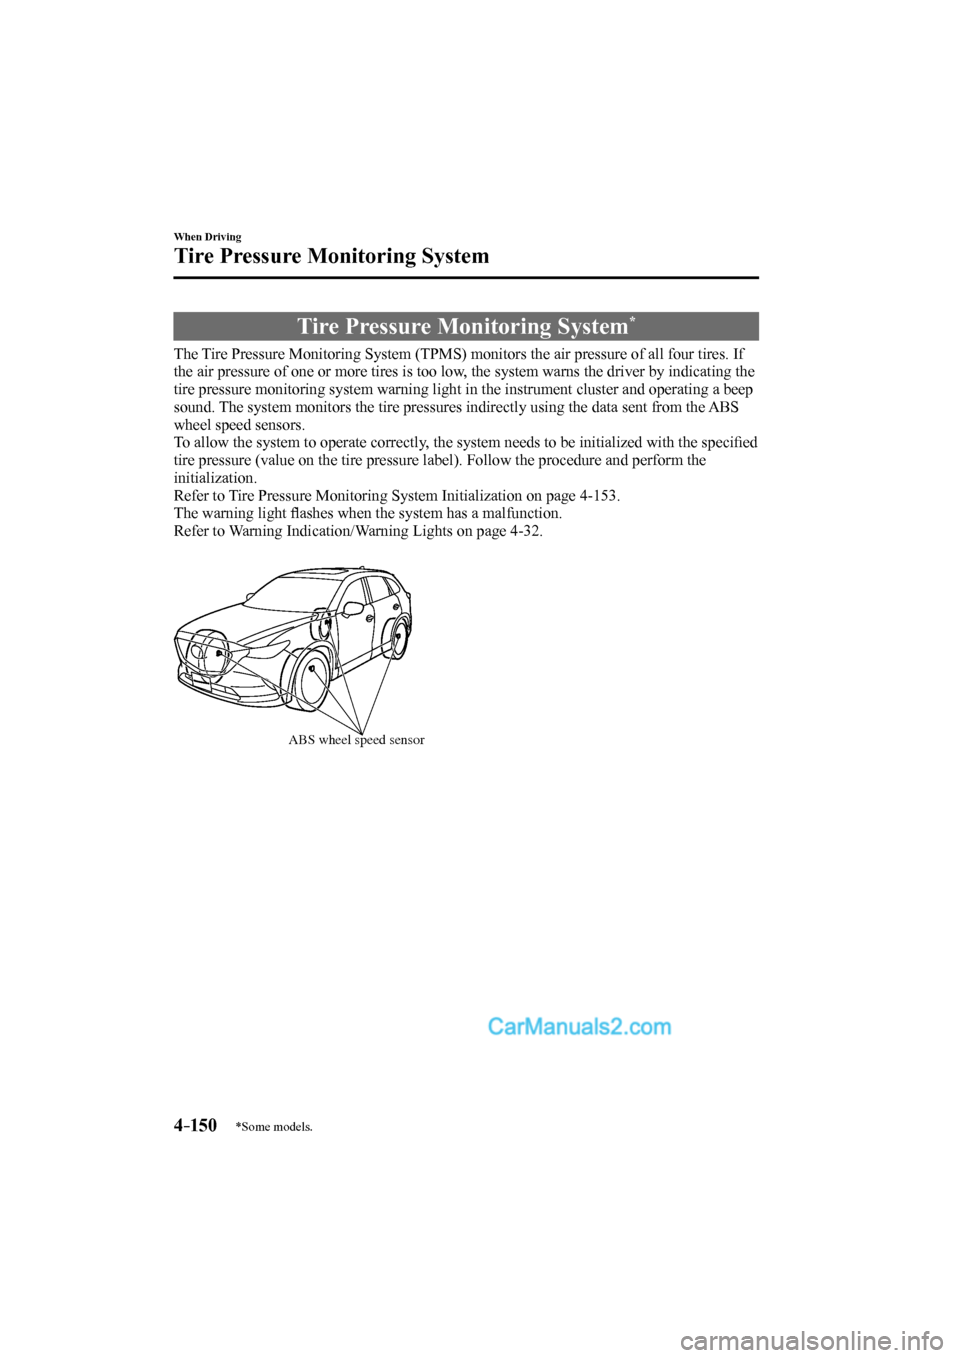 MAZDA MODEL CX-9 2017  Owners Manual (in English) 4–150
When Driving
Tire Pressure Monitoring System
*Some models.
      Tire  Pressure  Monitoring  System * 
            The Tire Pressure Monitoring System (TPMS) monitors the air pressure of all f